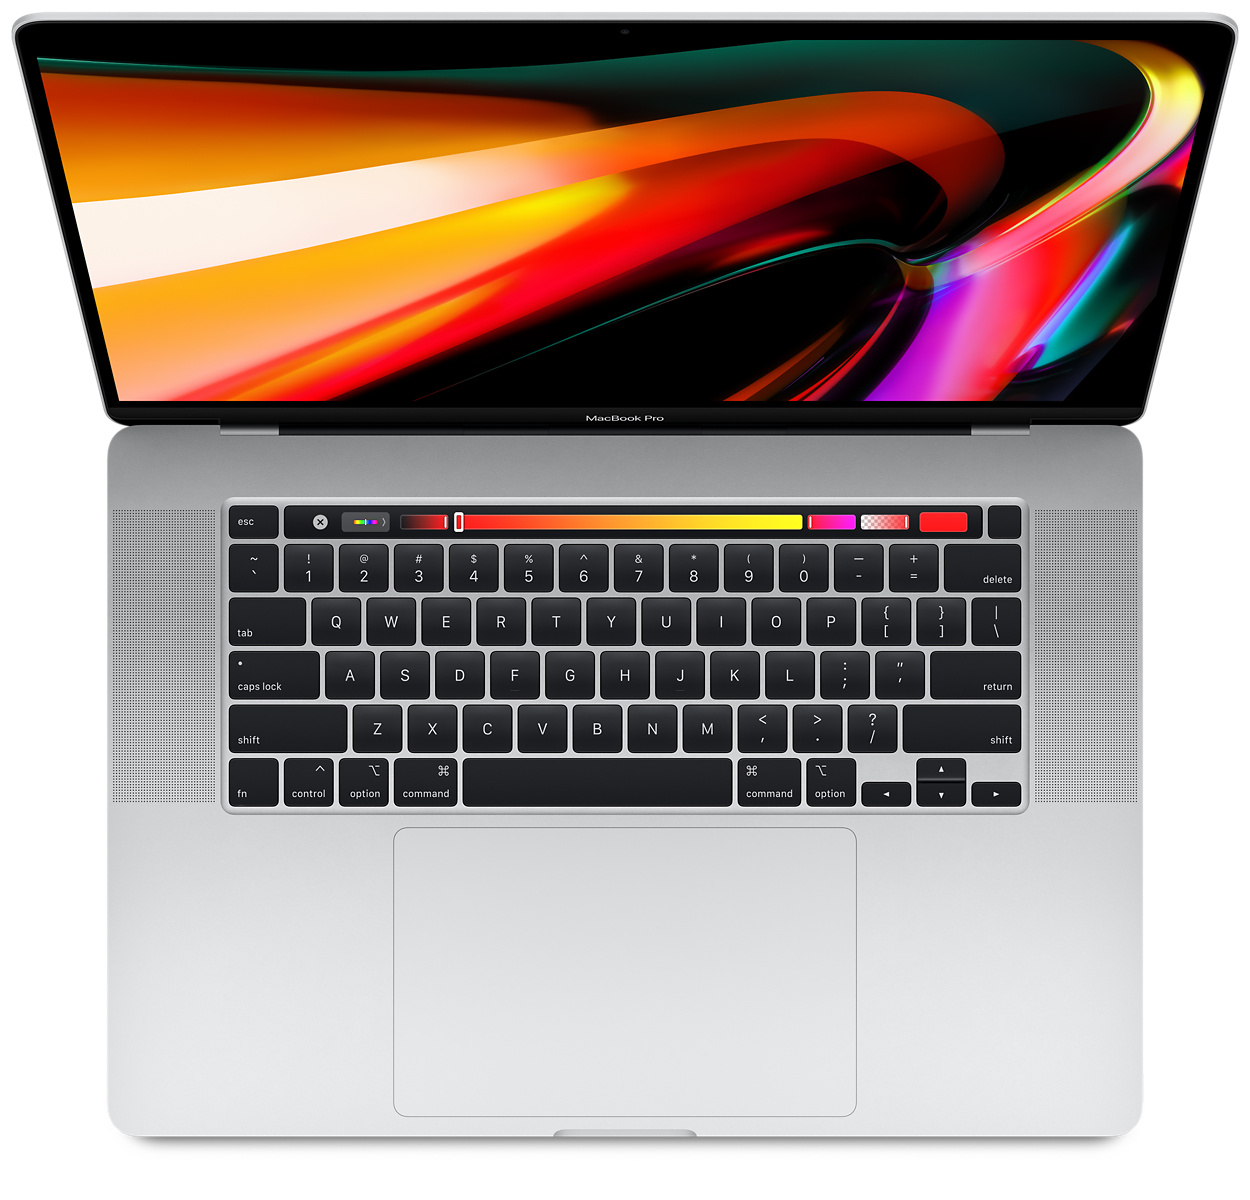 How to Mirror Image on Your Macbook Pro? 17